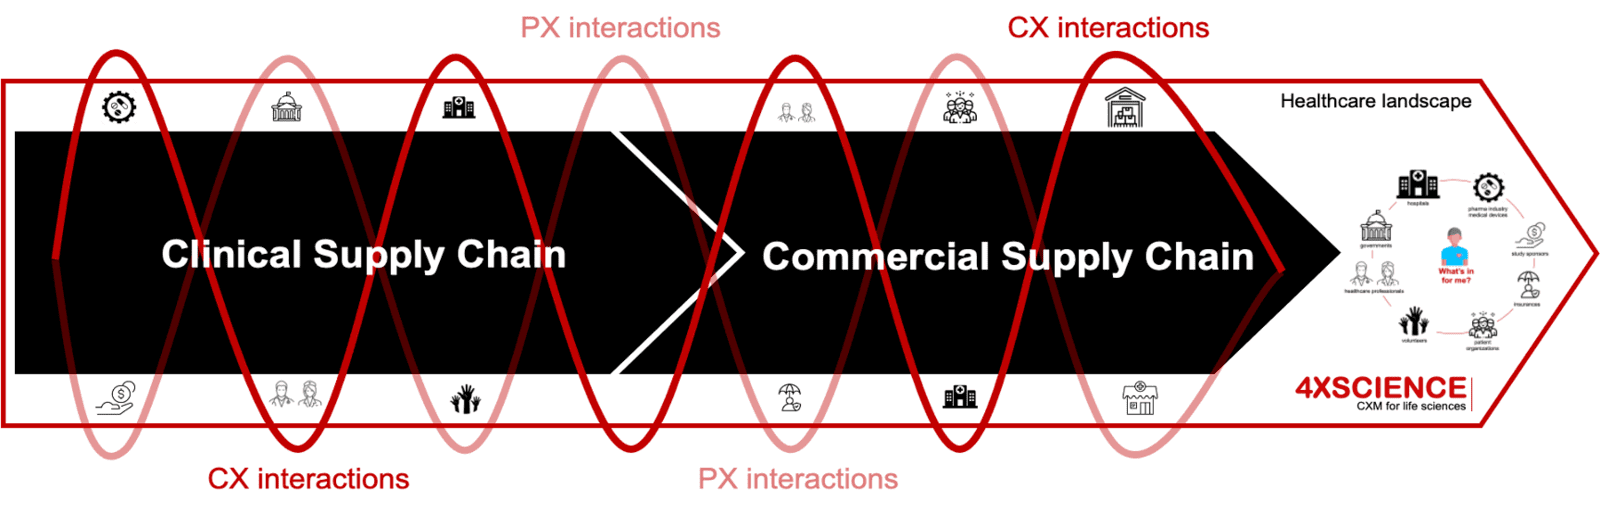 entanglement of CX-PX across value chain